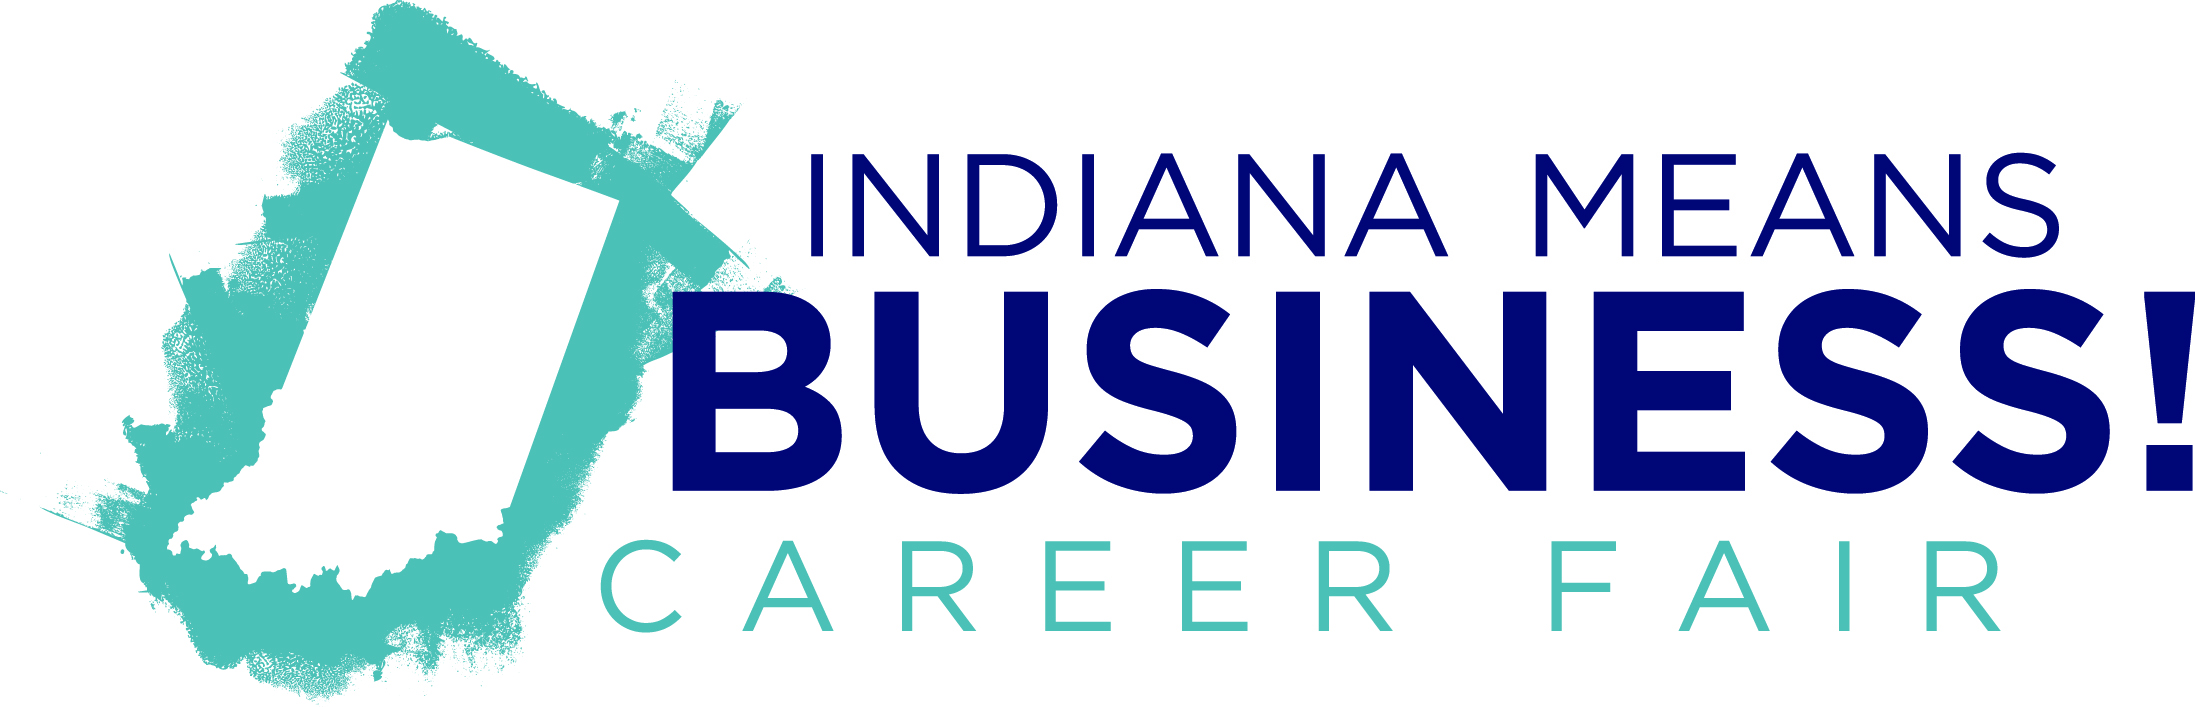 Career Fair Logo Hosted By The College Career